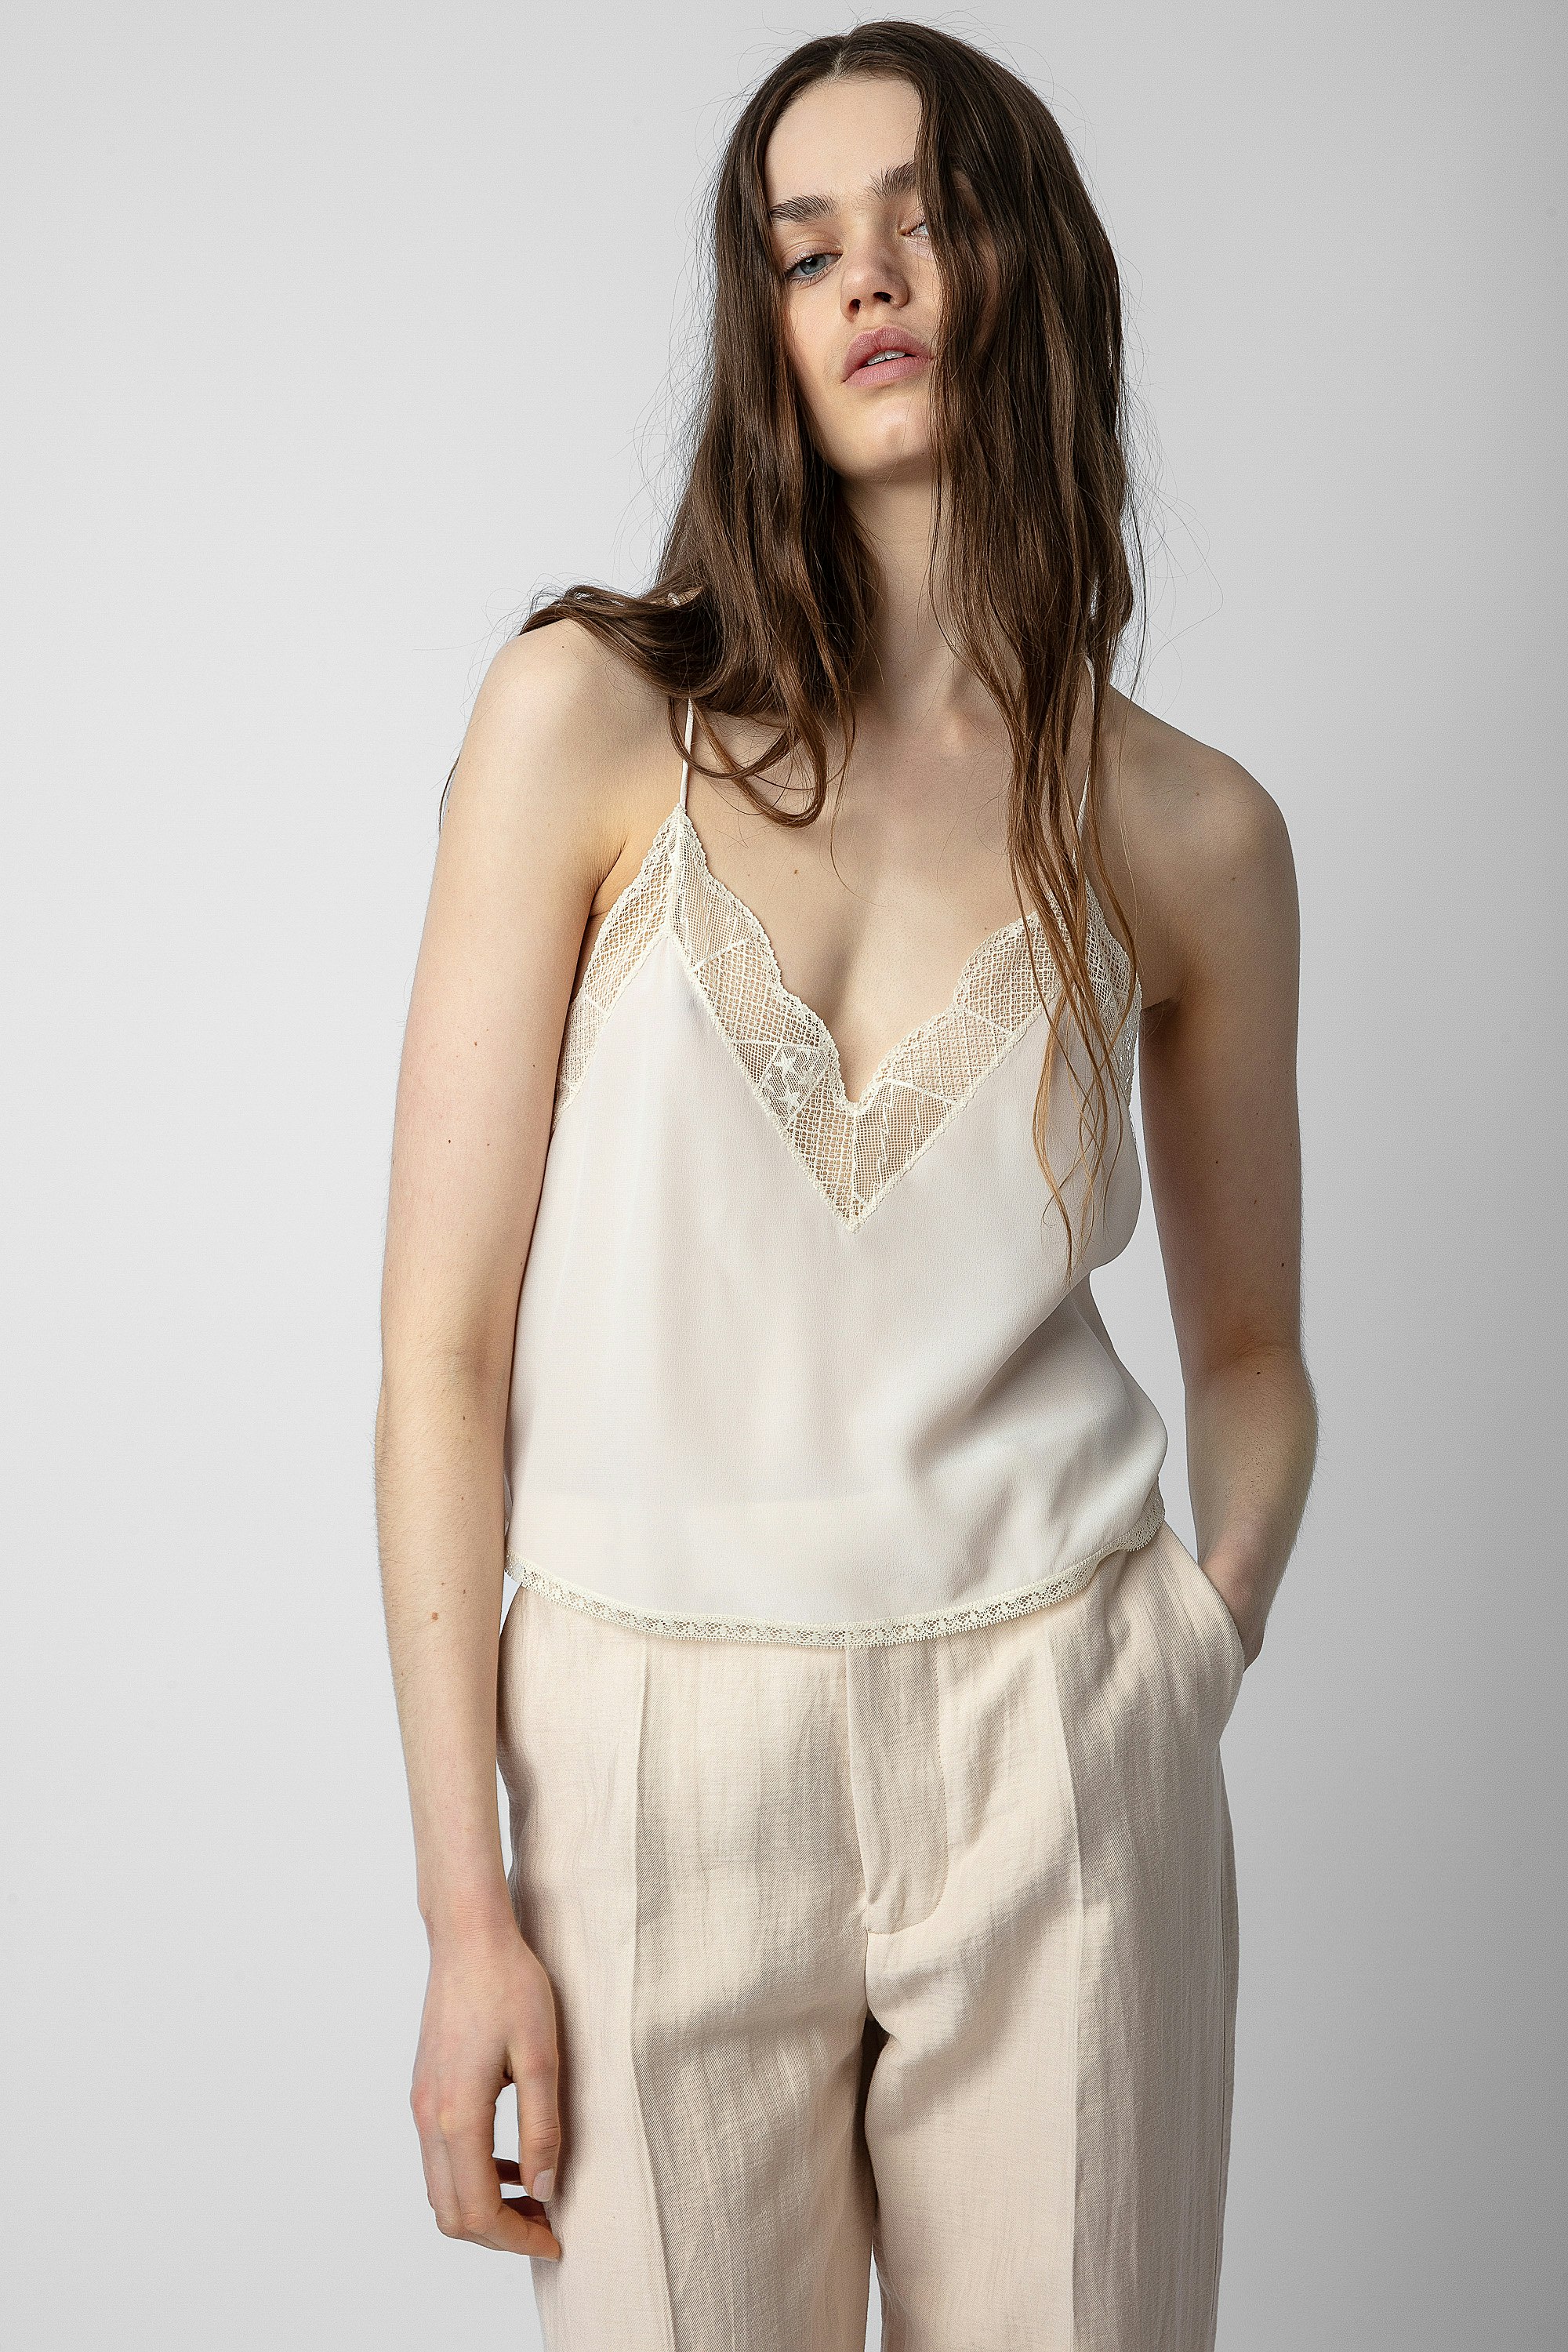 Christy Silk Cropped Camisole - Women's off-white silk crop top camisole with lace neckline